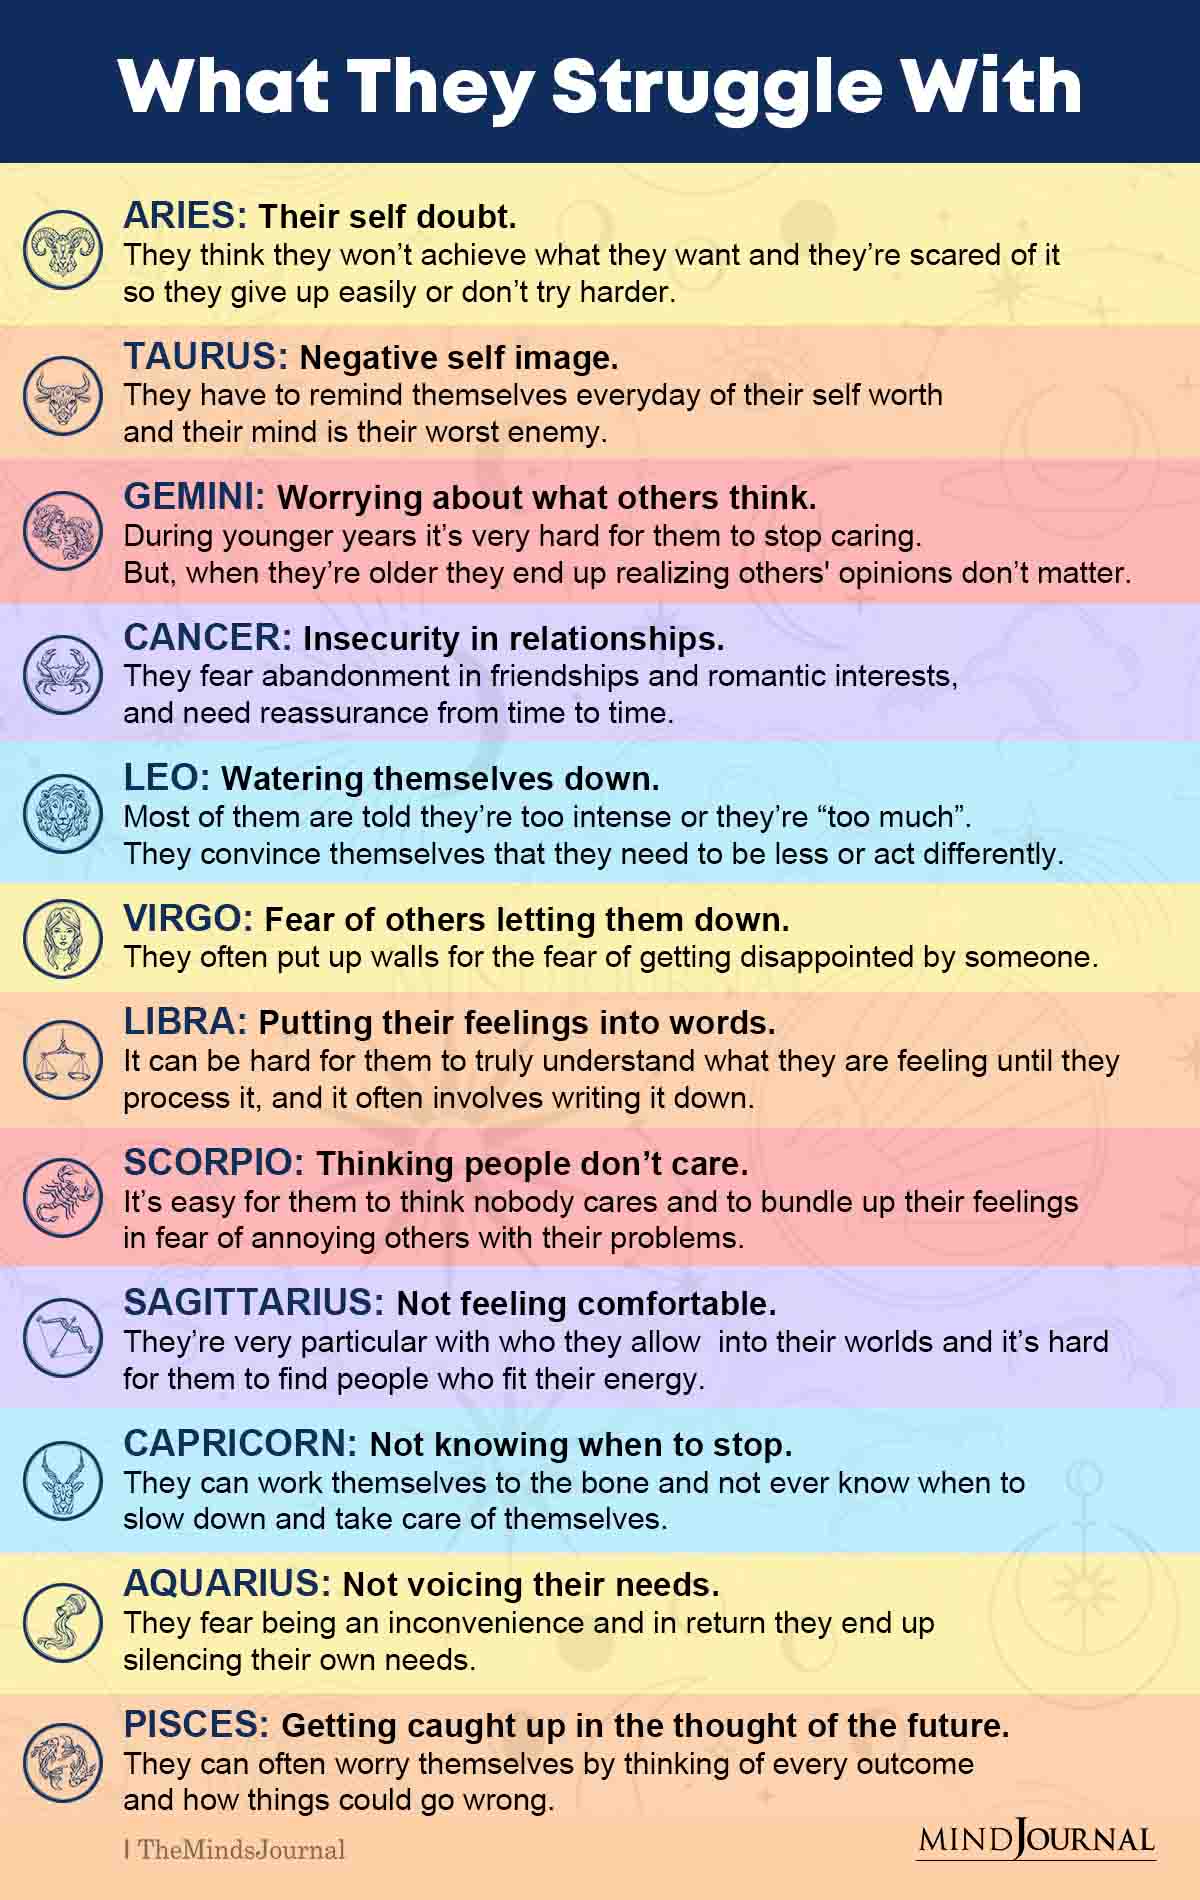 Specific Things the Zodiac Signs Struggle With